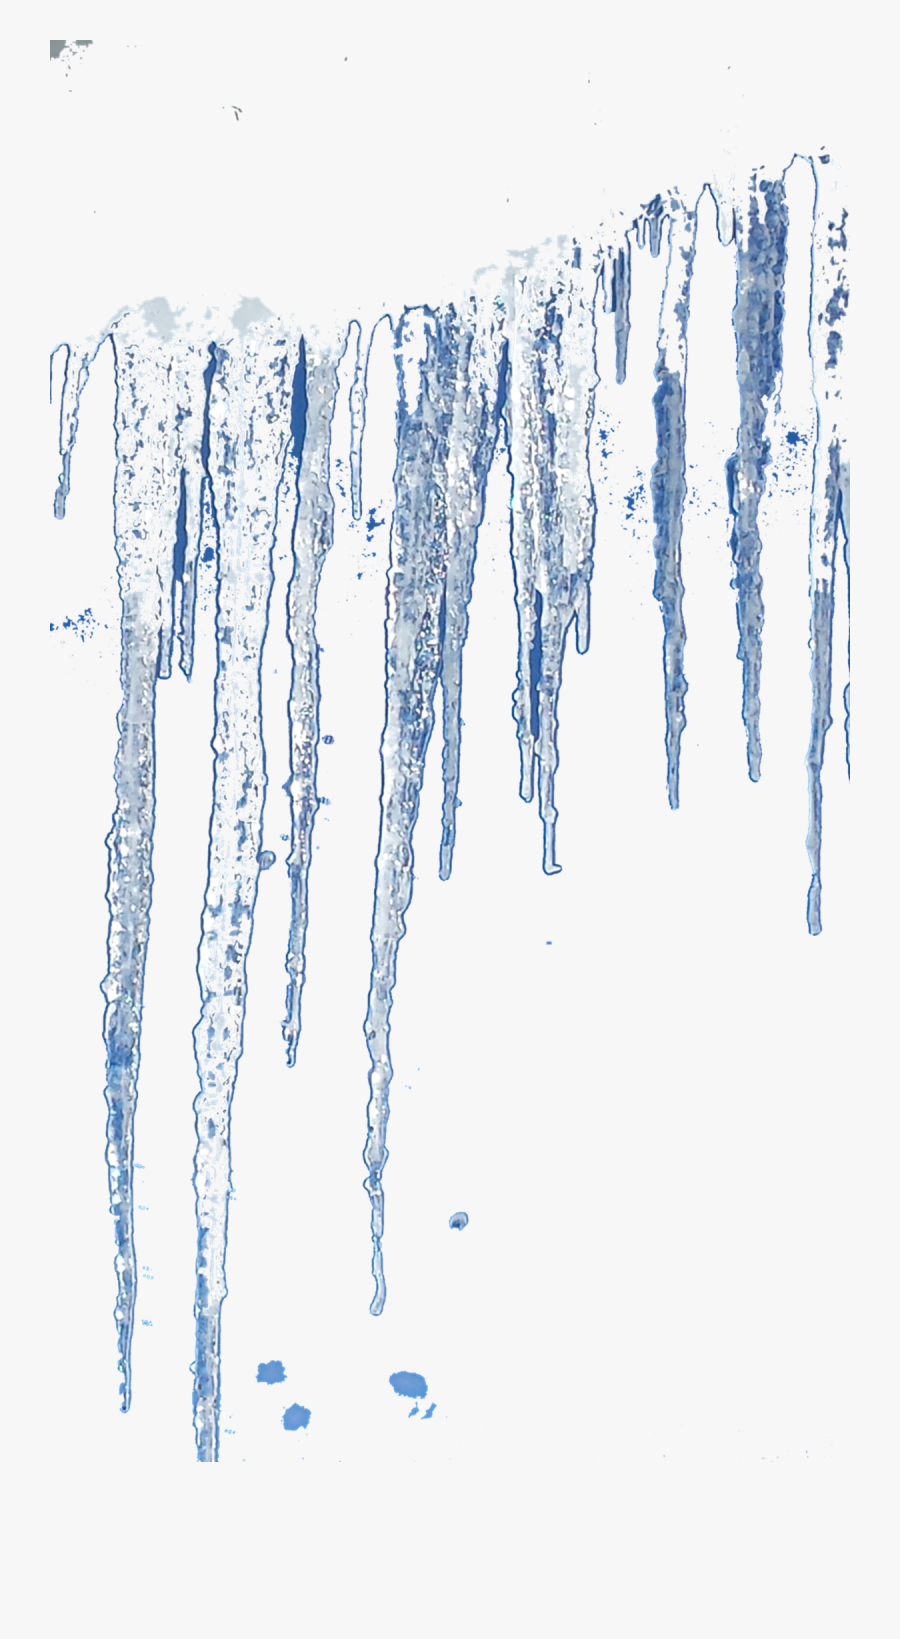 Icicles Png Image File - Icicle, Transparent Clipart